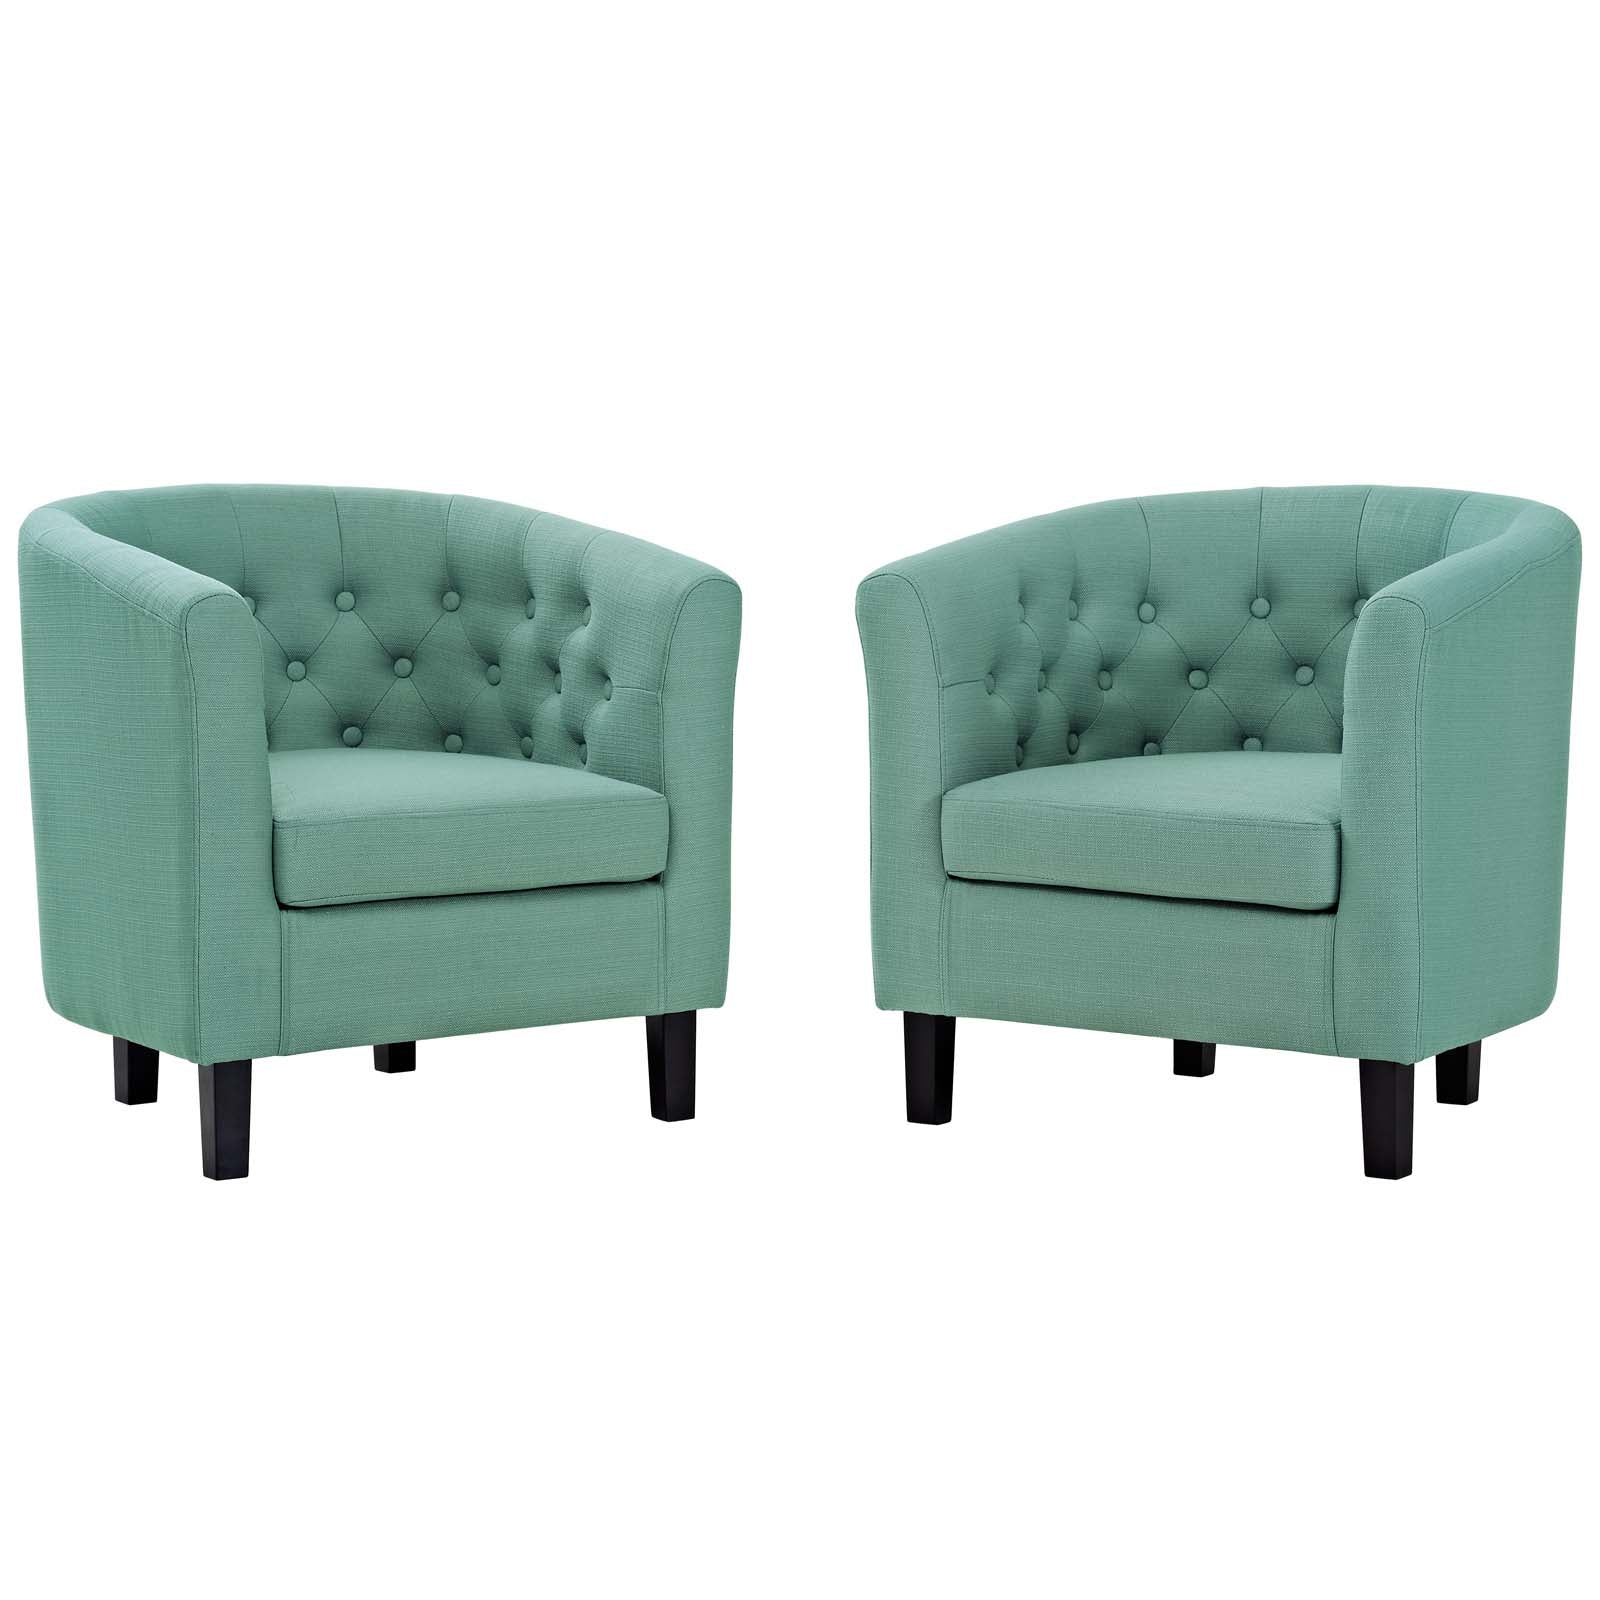 Modway Accent Chairs - Prospect 2 Piece Upholstered Fabric Armchair Set Laguna